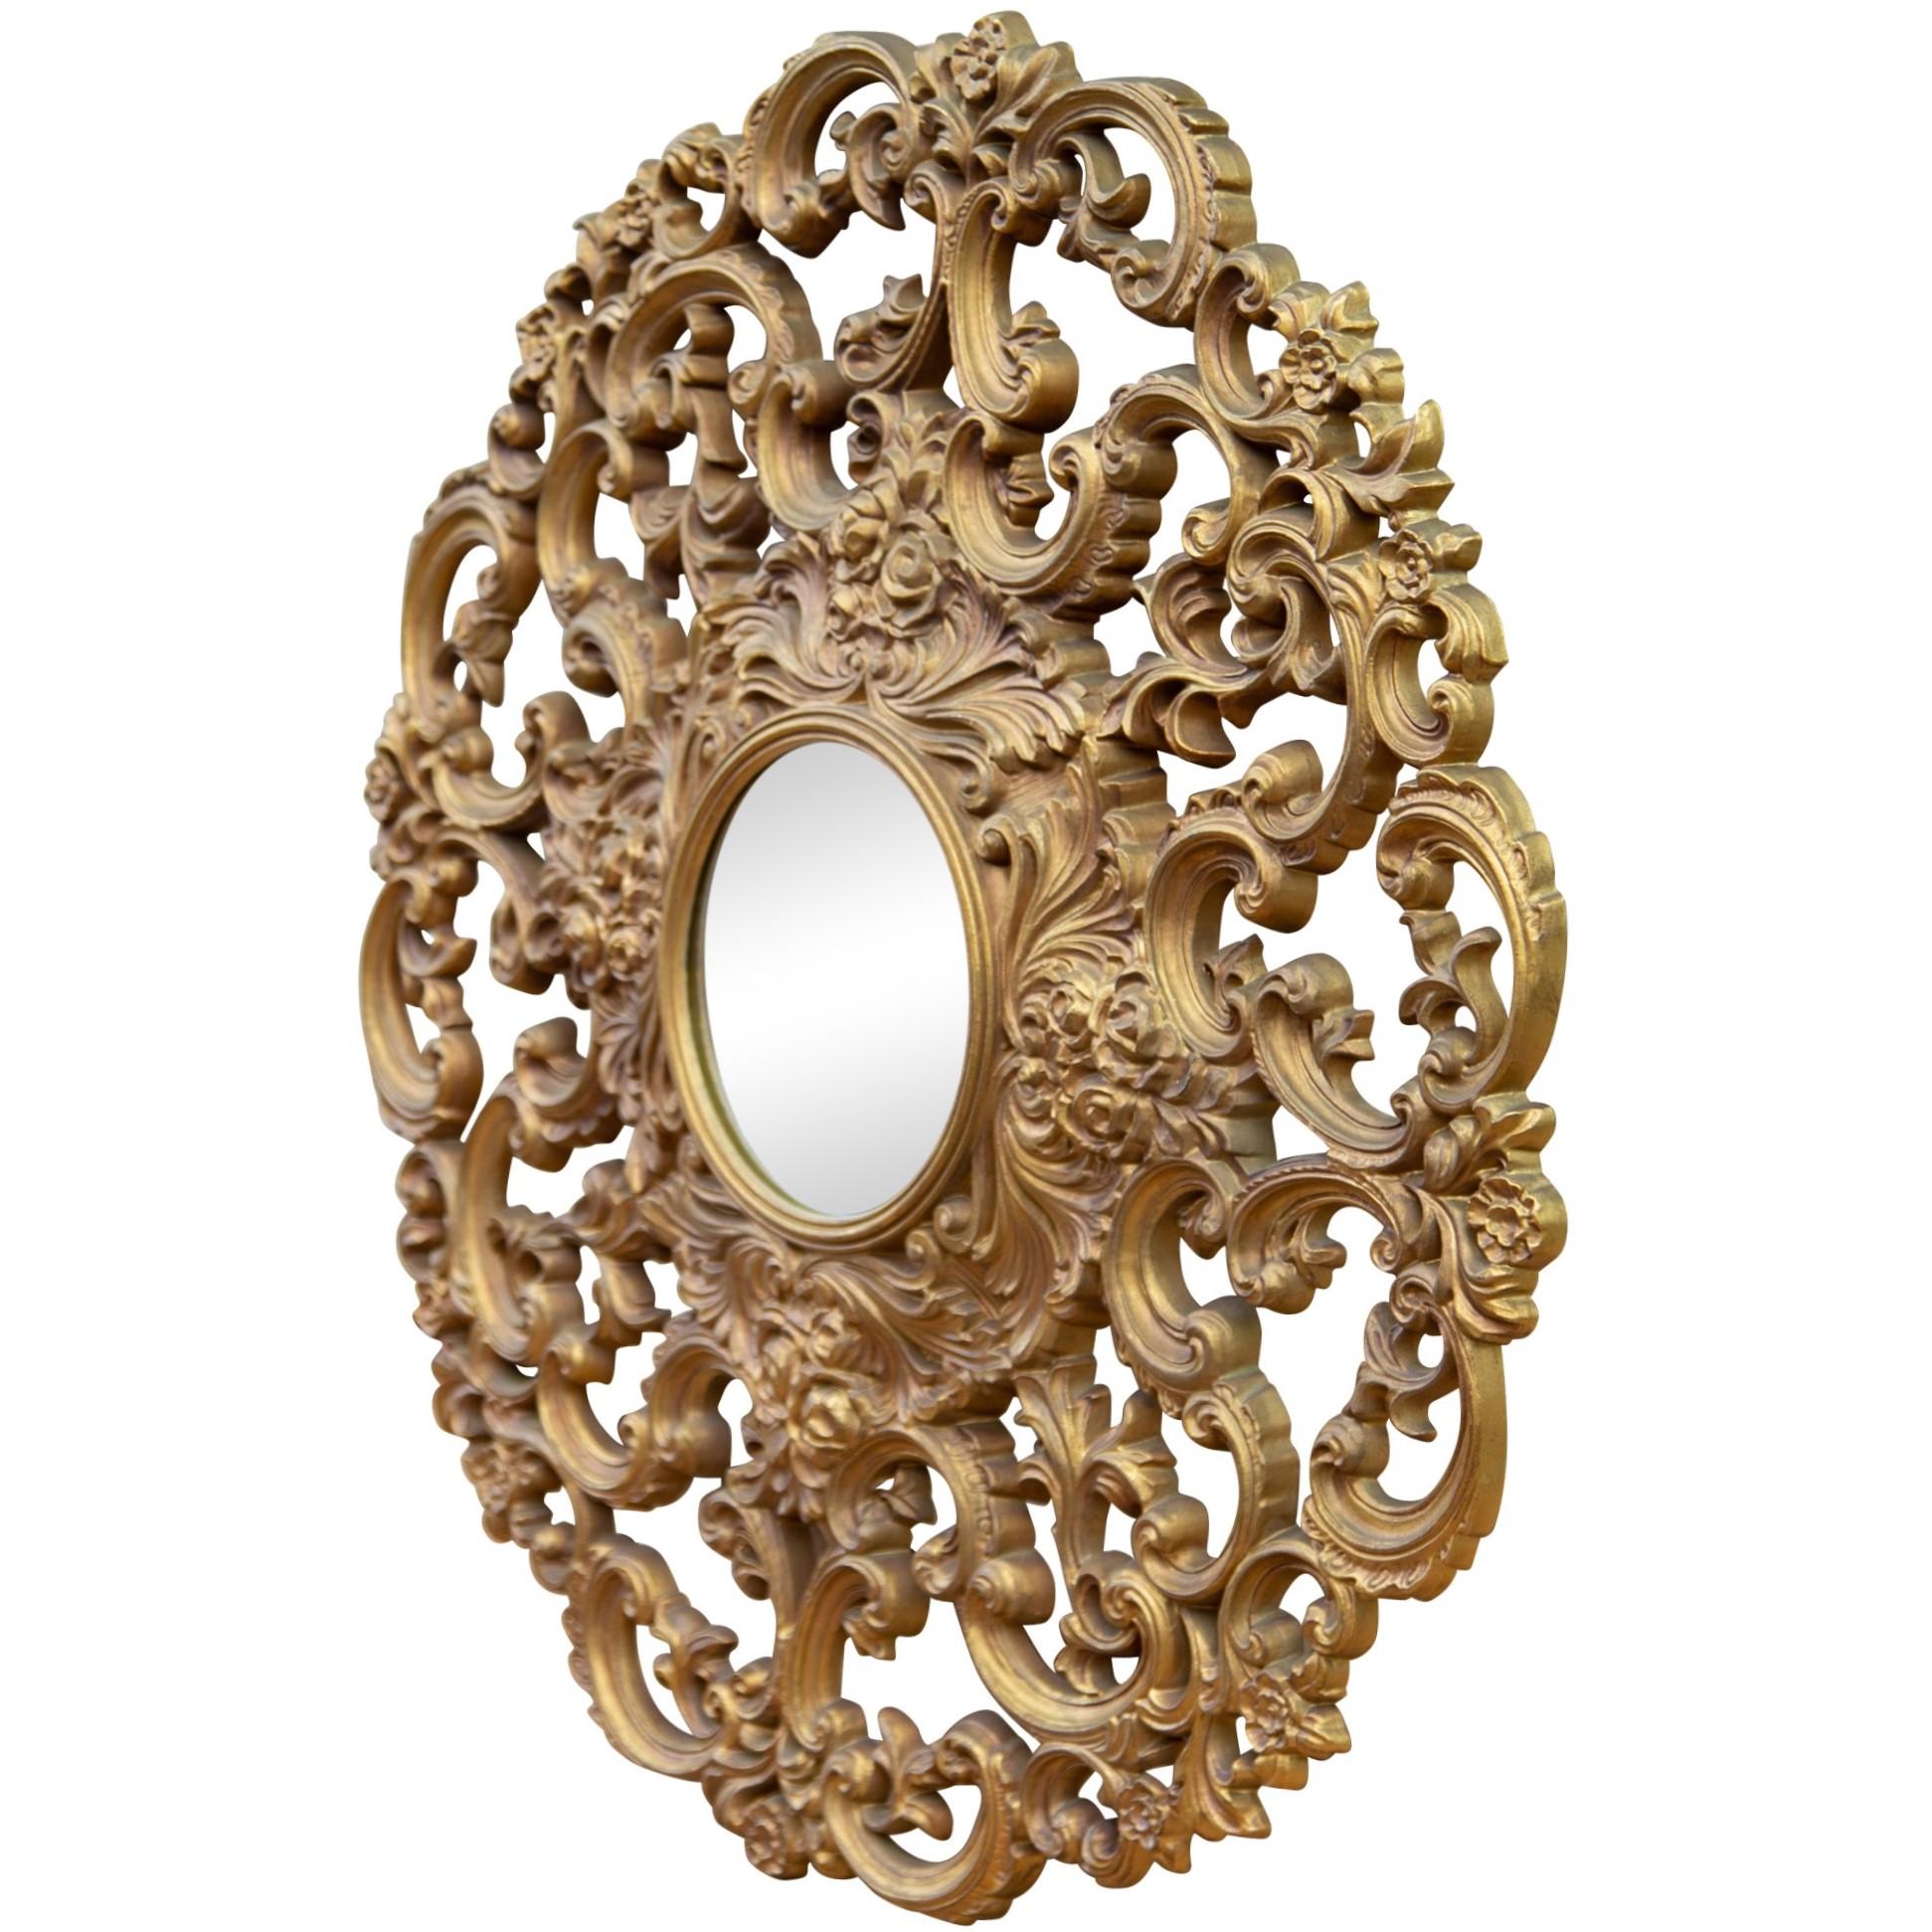 Cast 1960s Large Baroque Style Gold Filigree Round Mirror